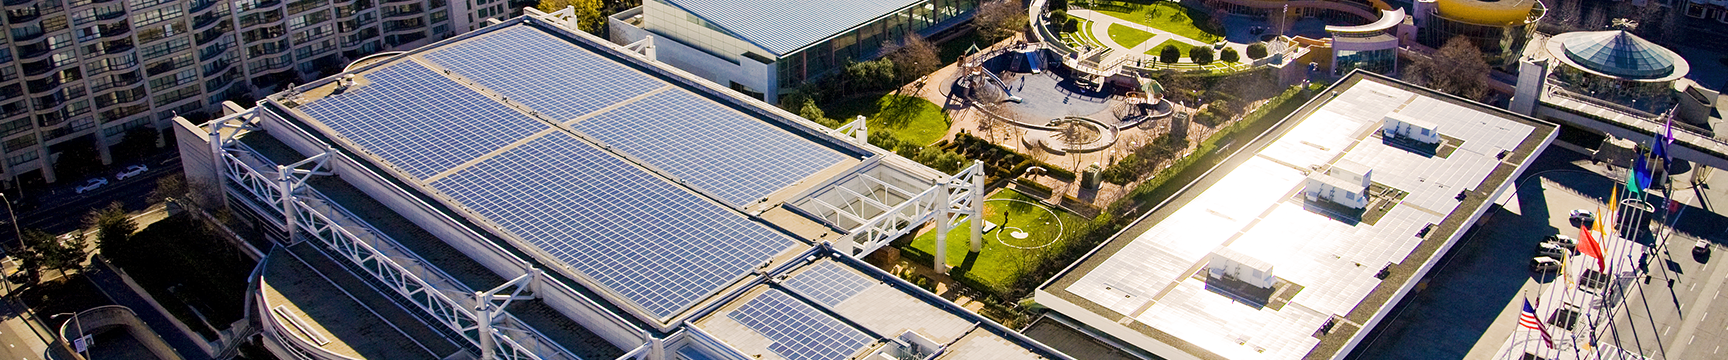 An aerial photograph of the solar array on Moscone Center in San Francisco.